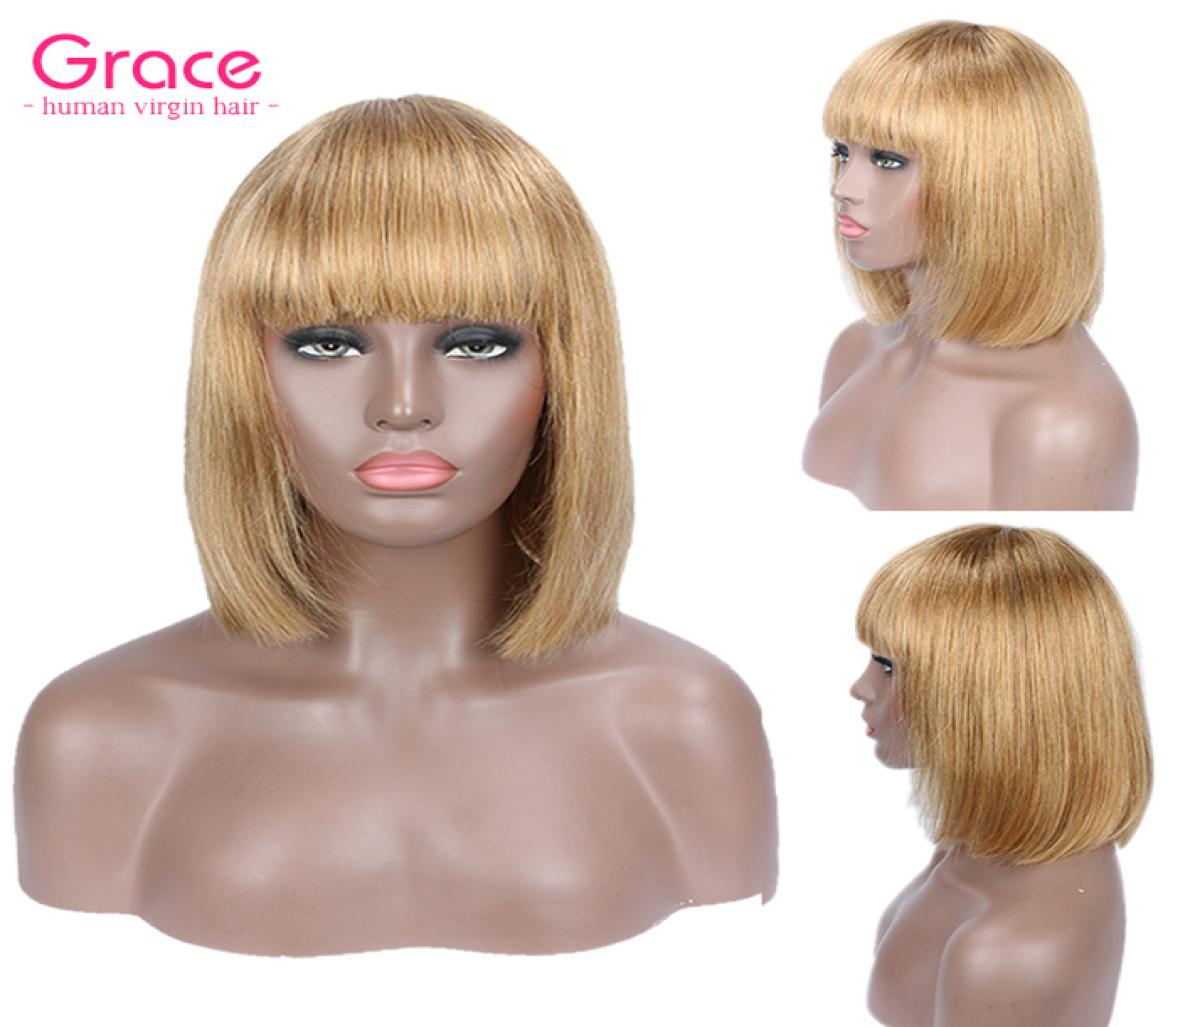 

27 Short Human Hair Wig Pixie Cut Peruvian Remy Straight Bob Wigs With Bangs For Black Women Honey Blonde Glueless Non Lace Front7853695, Burgundy